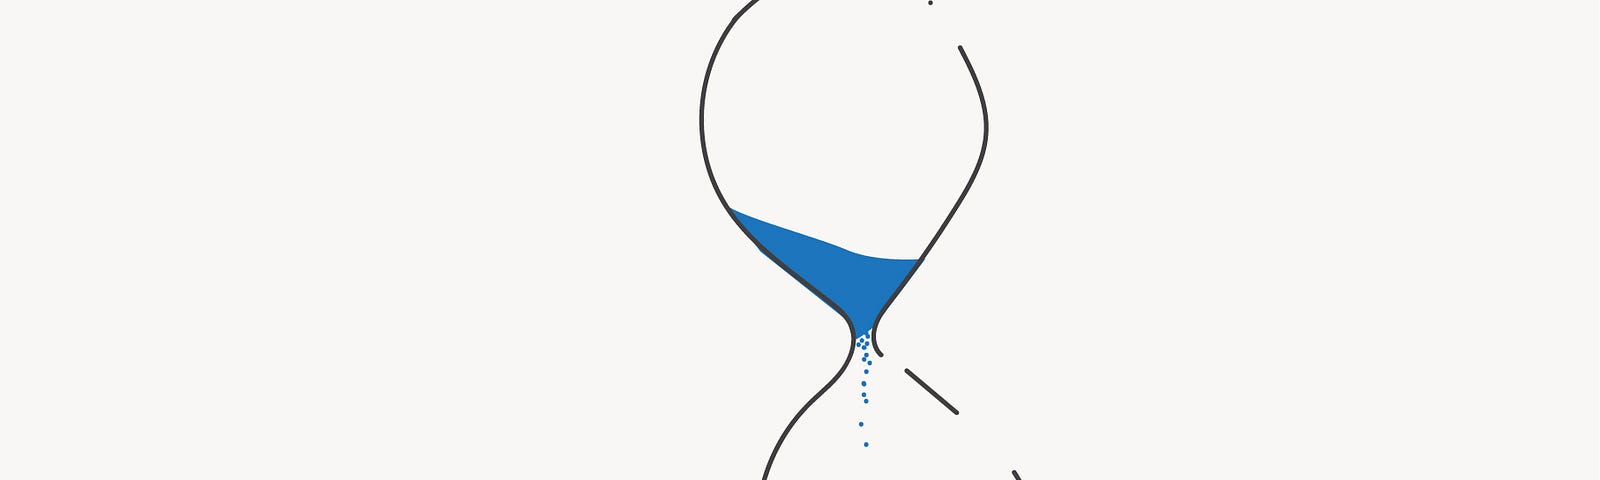 Illustration of an hourglass with blue sand sifting through it